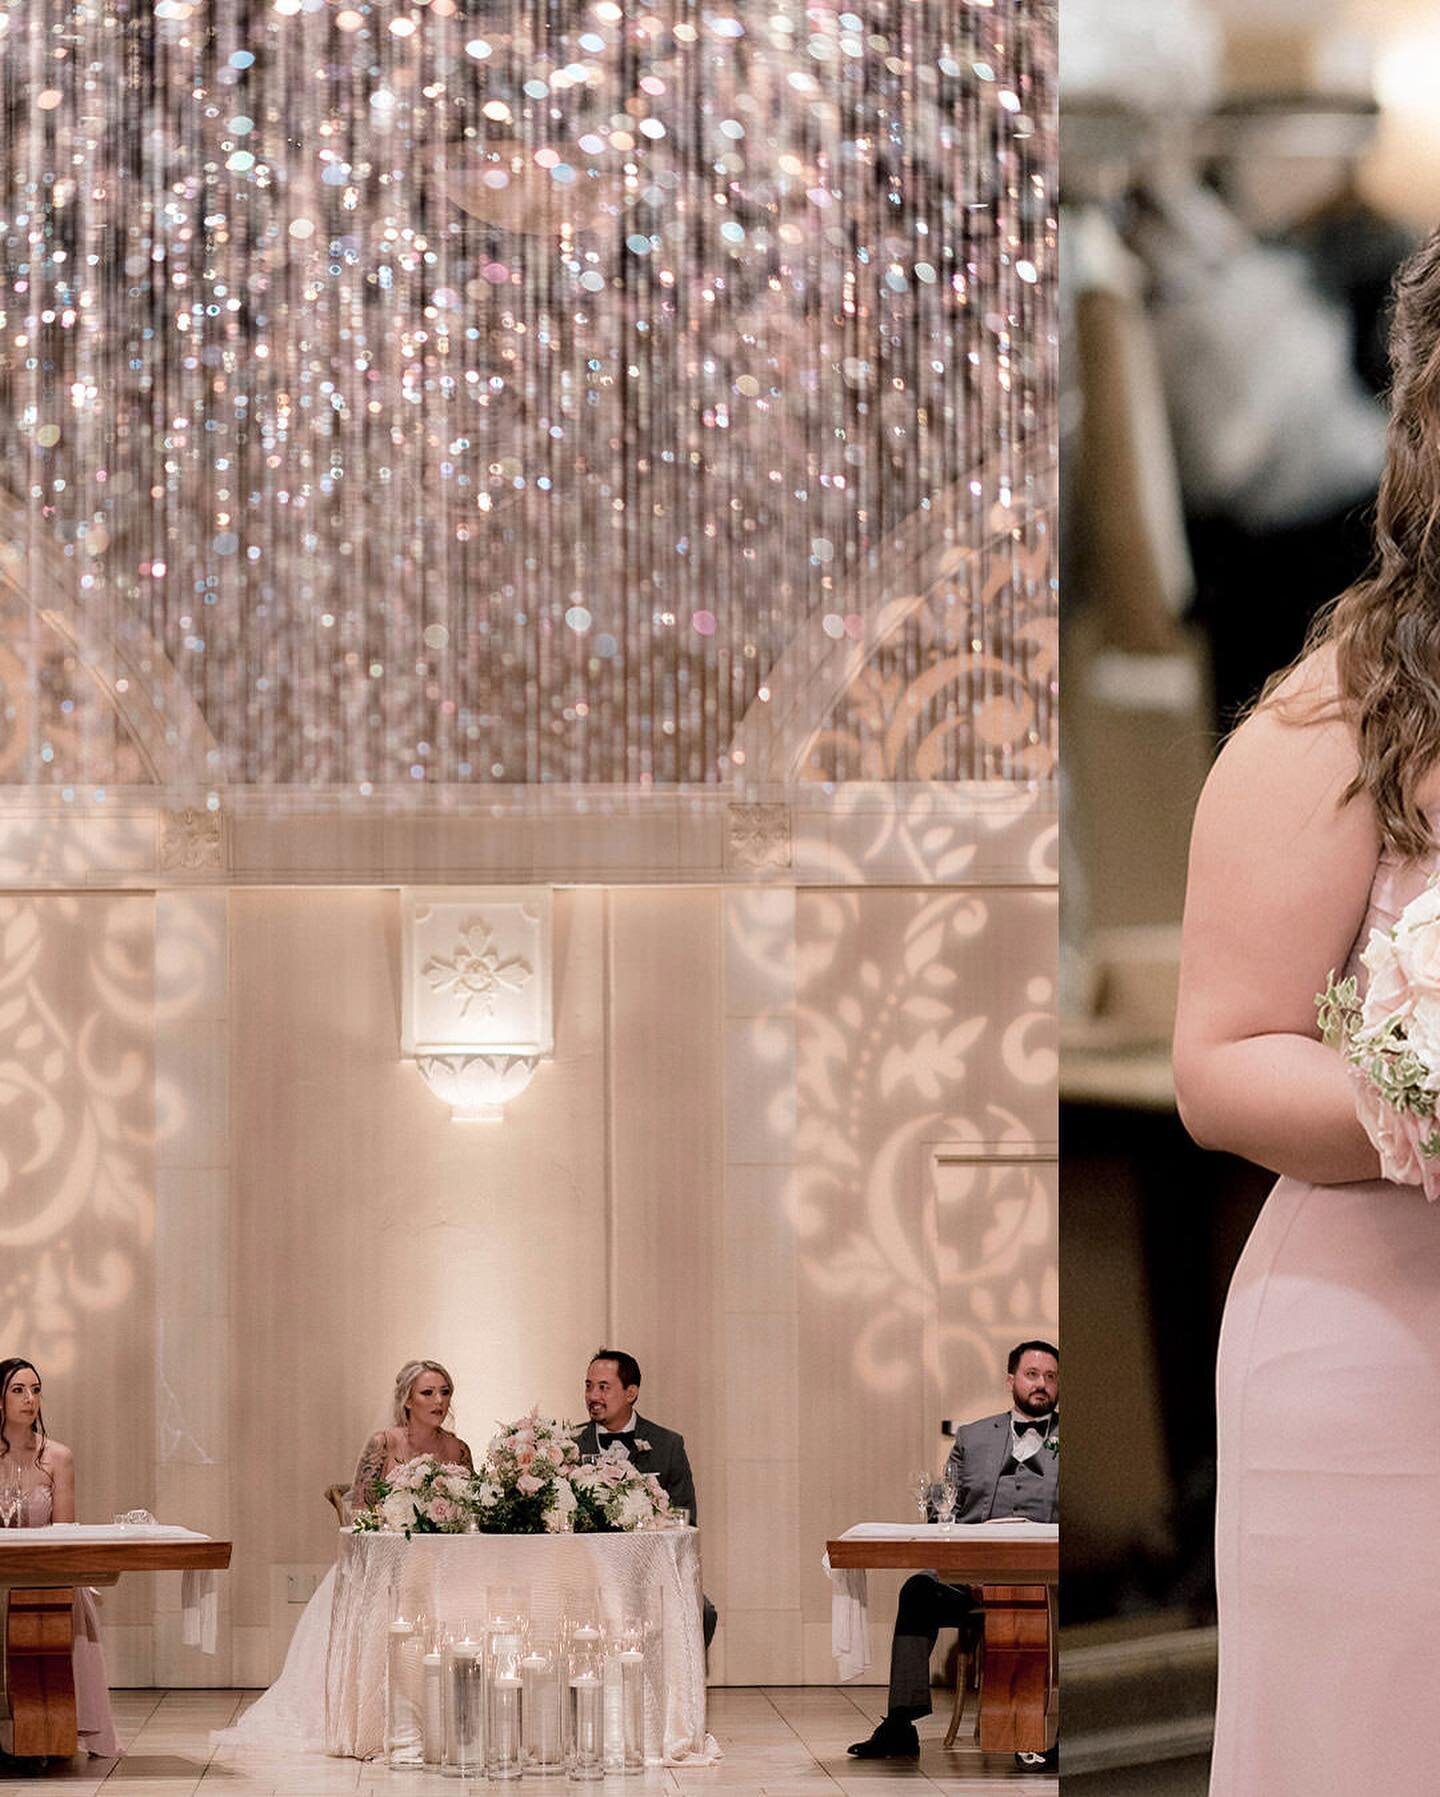 Congrats to the new Mr. &amp; Mrs. Quintana (@mia_destinee and @bcquintana) who were showered with many blessings (including abundant rain)! The crystal chandeliers with their suspended prismatic drops will now forever be a visual memento of their sp